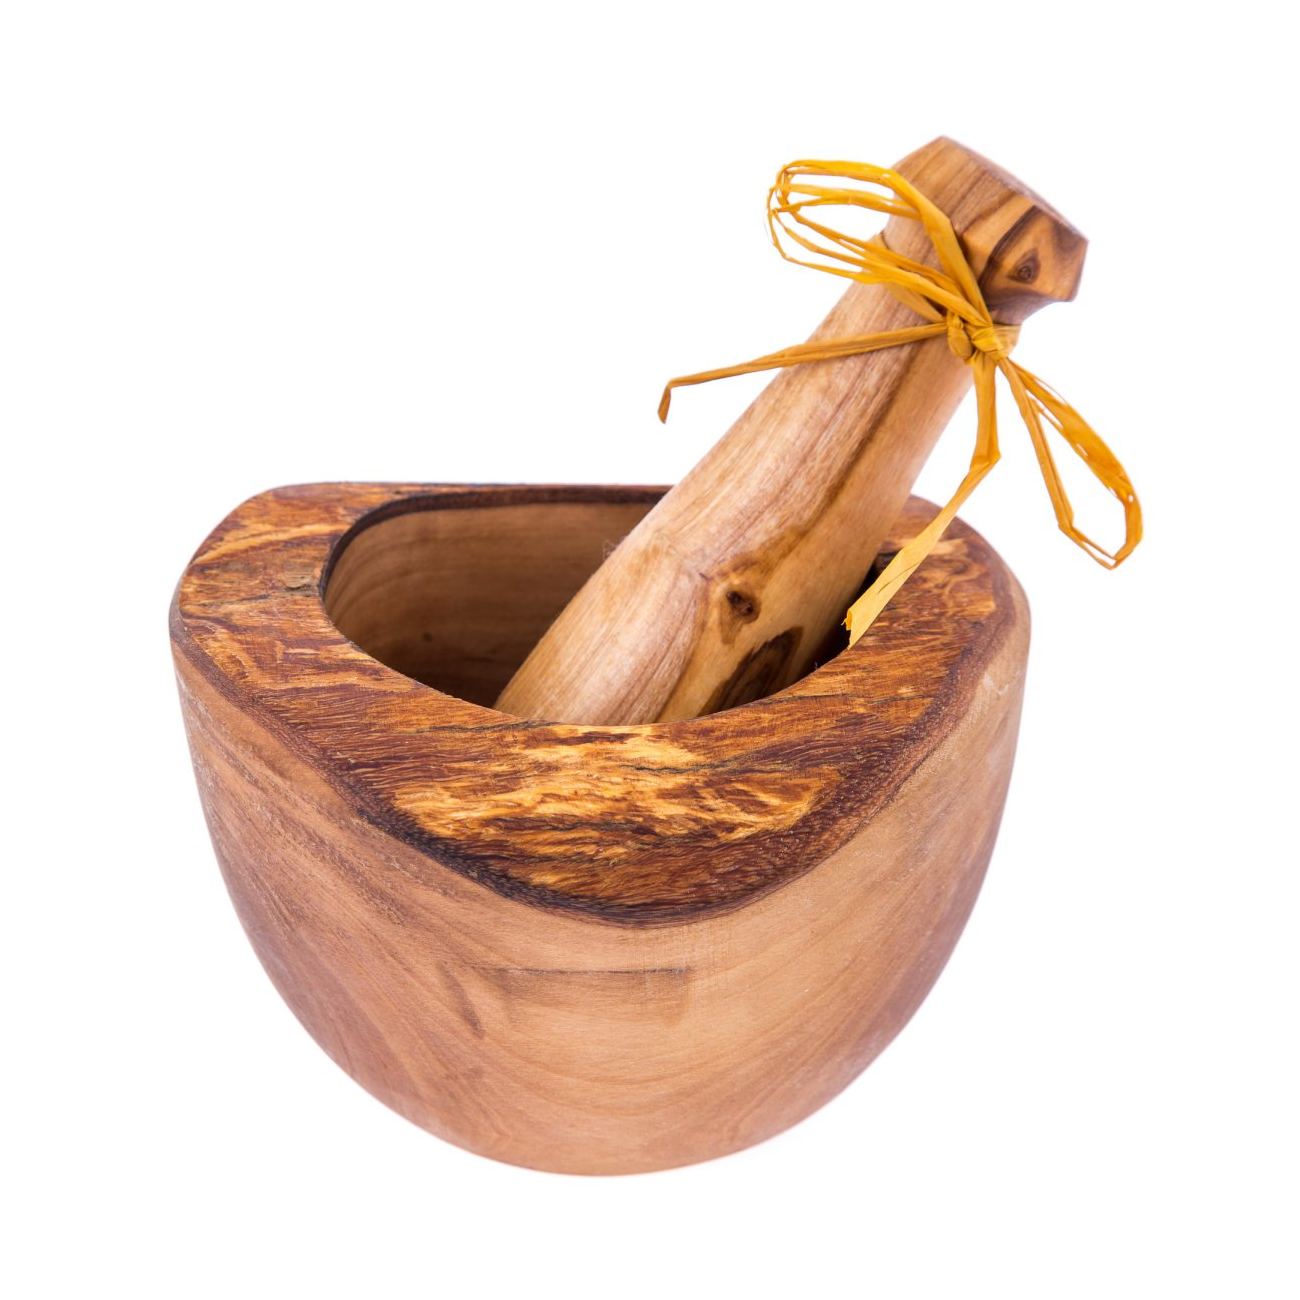 Mortar and Pestle Olive Wood in S XL / Wooden Mortar Set handmade rustic